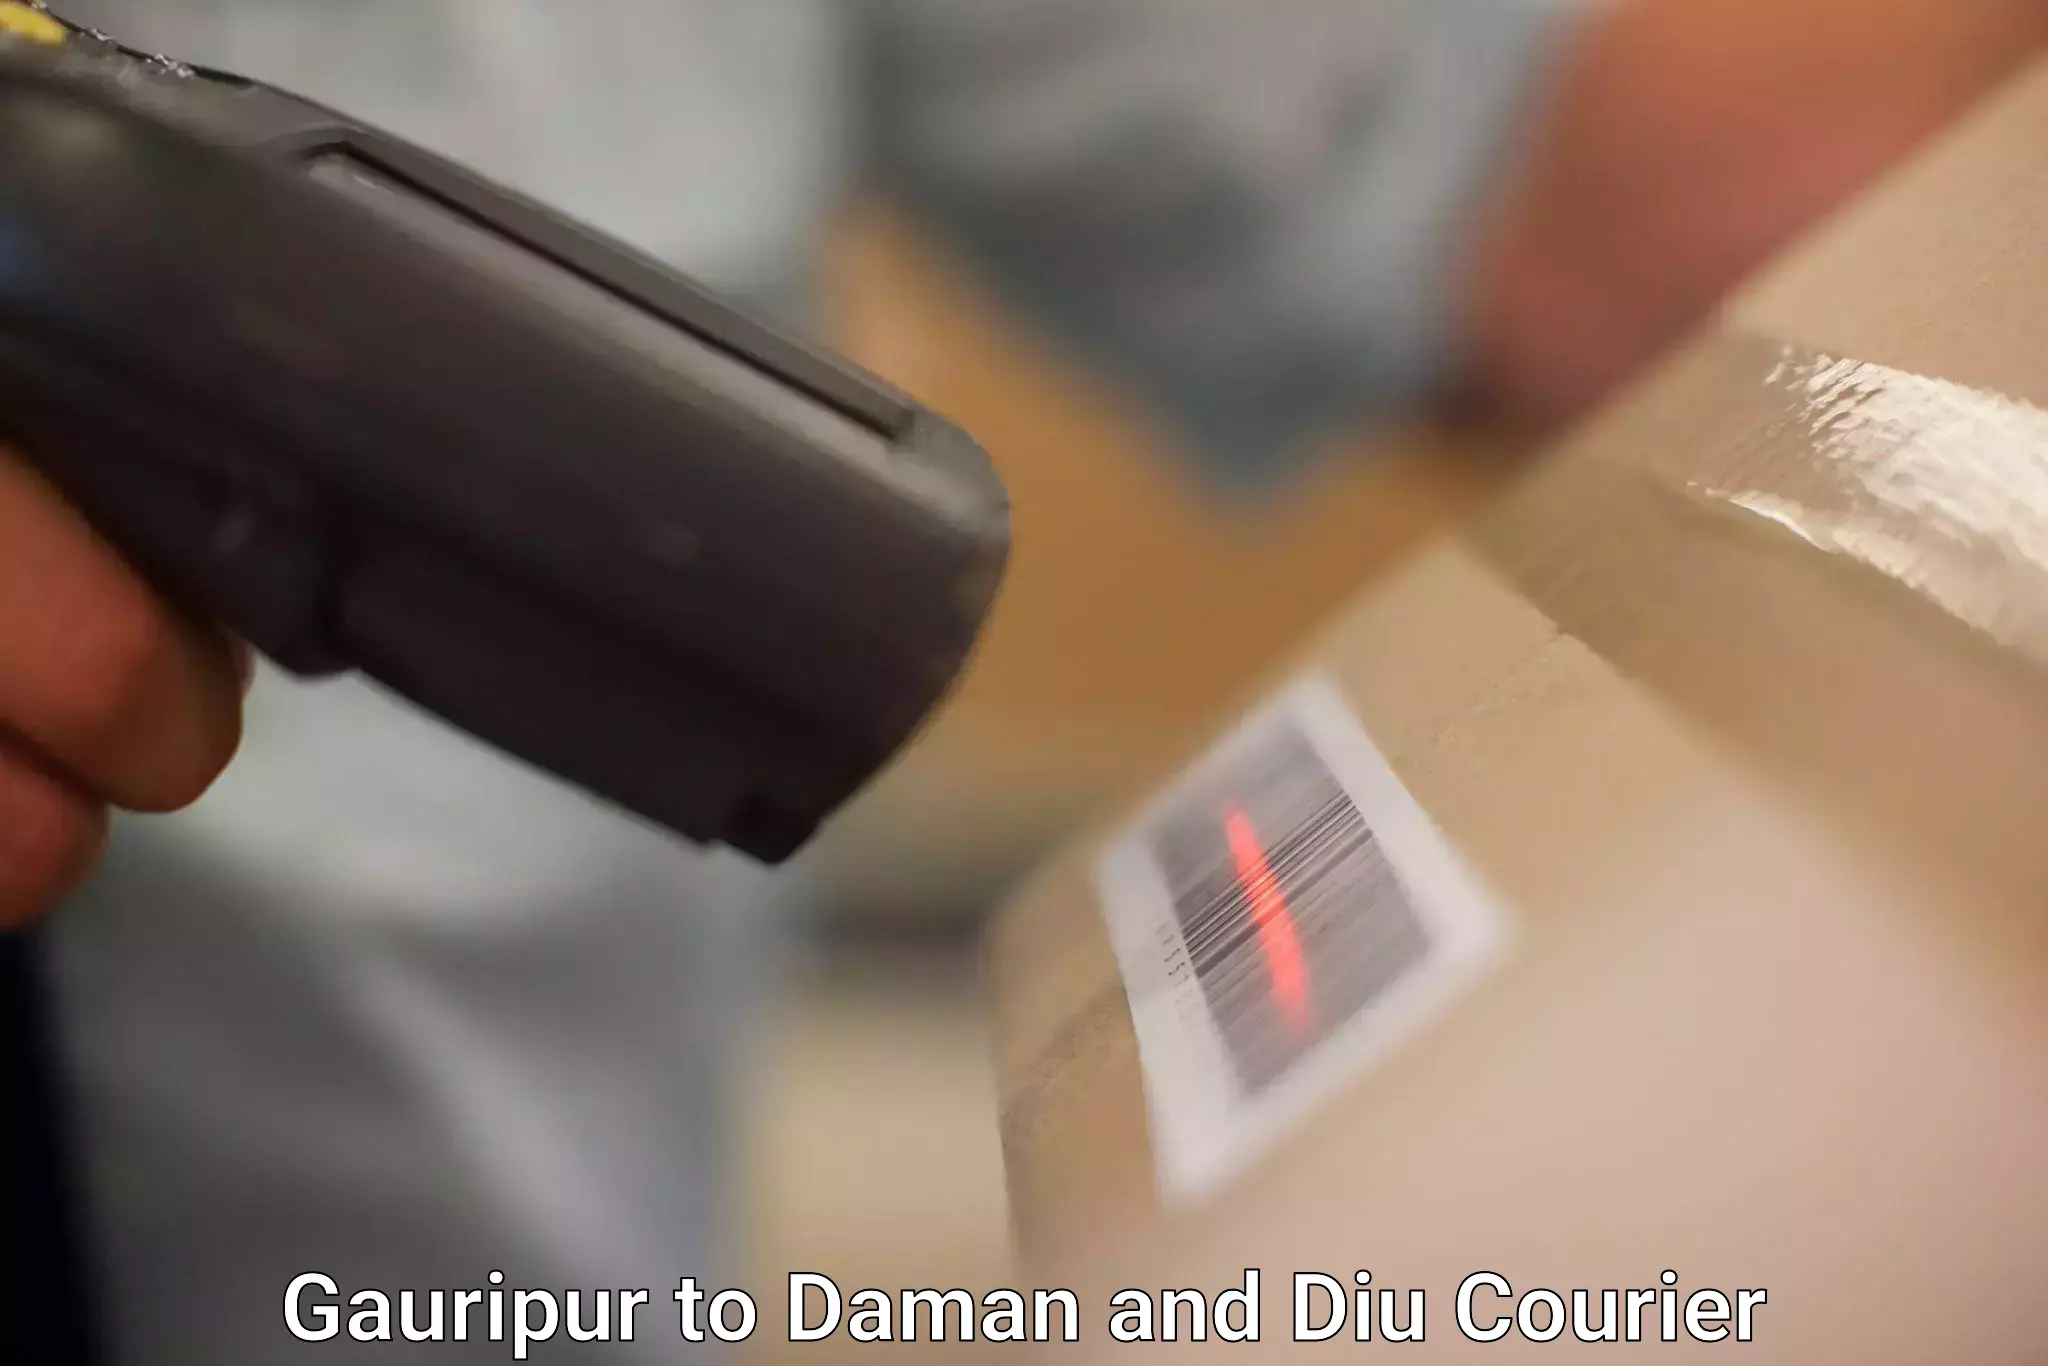 Professional courier handling Gauripur to Daman